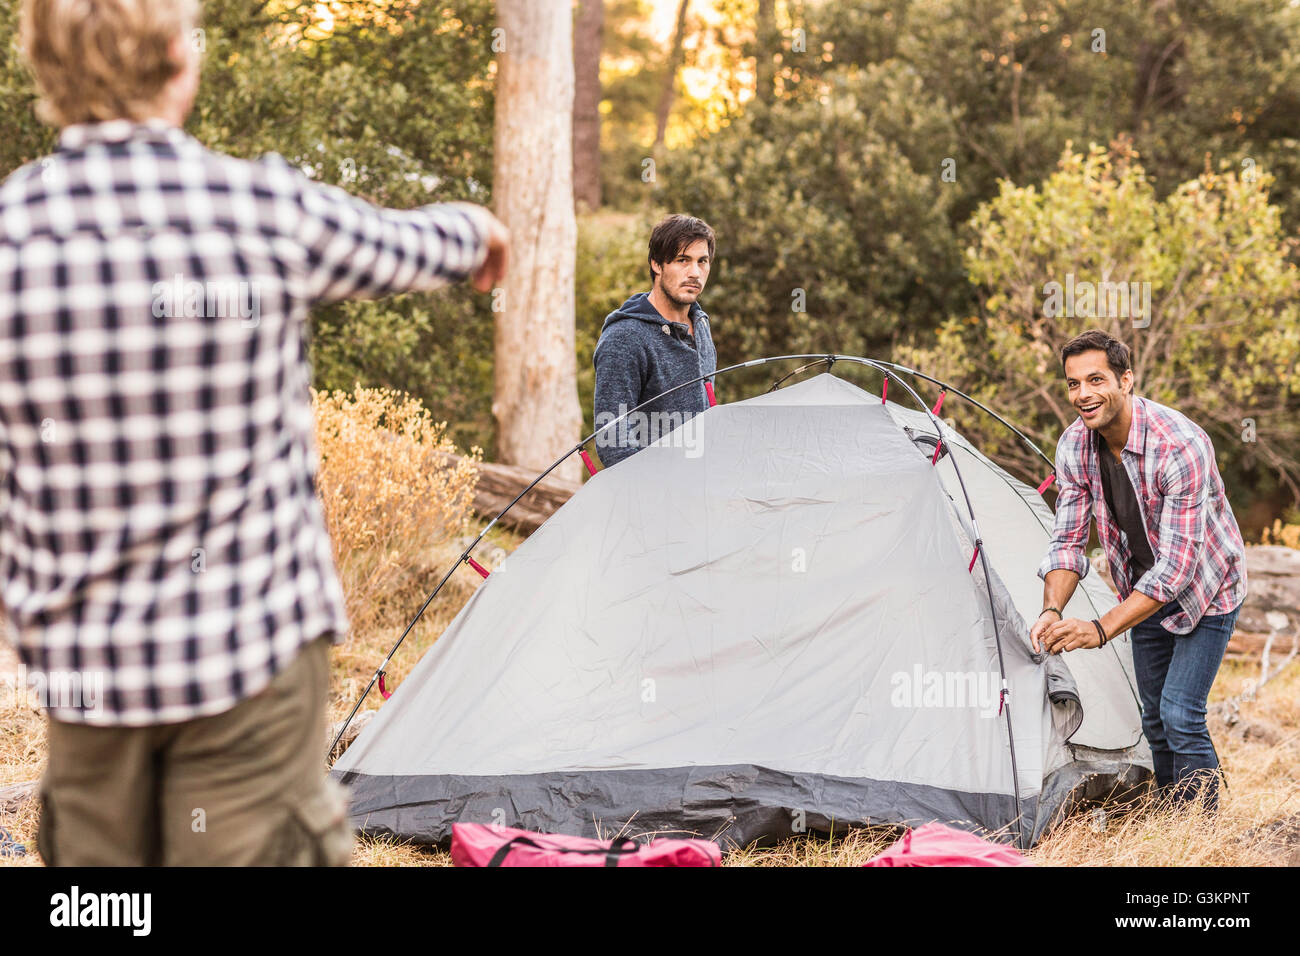 Three men putting up tent together in forest, Deer Park, Cape Town, South Africa Stock Photo